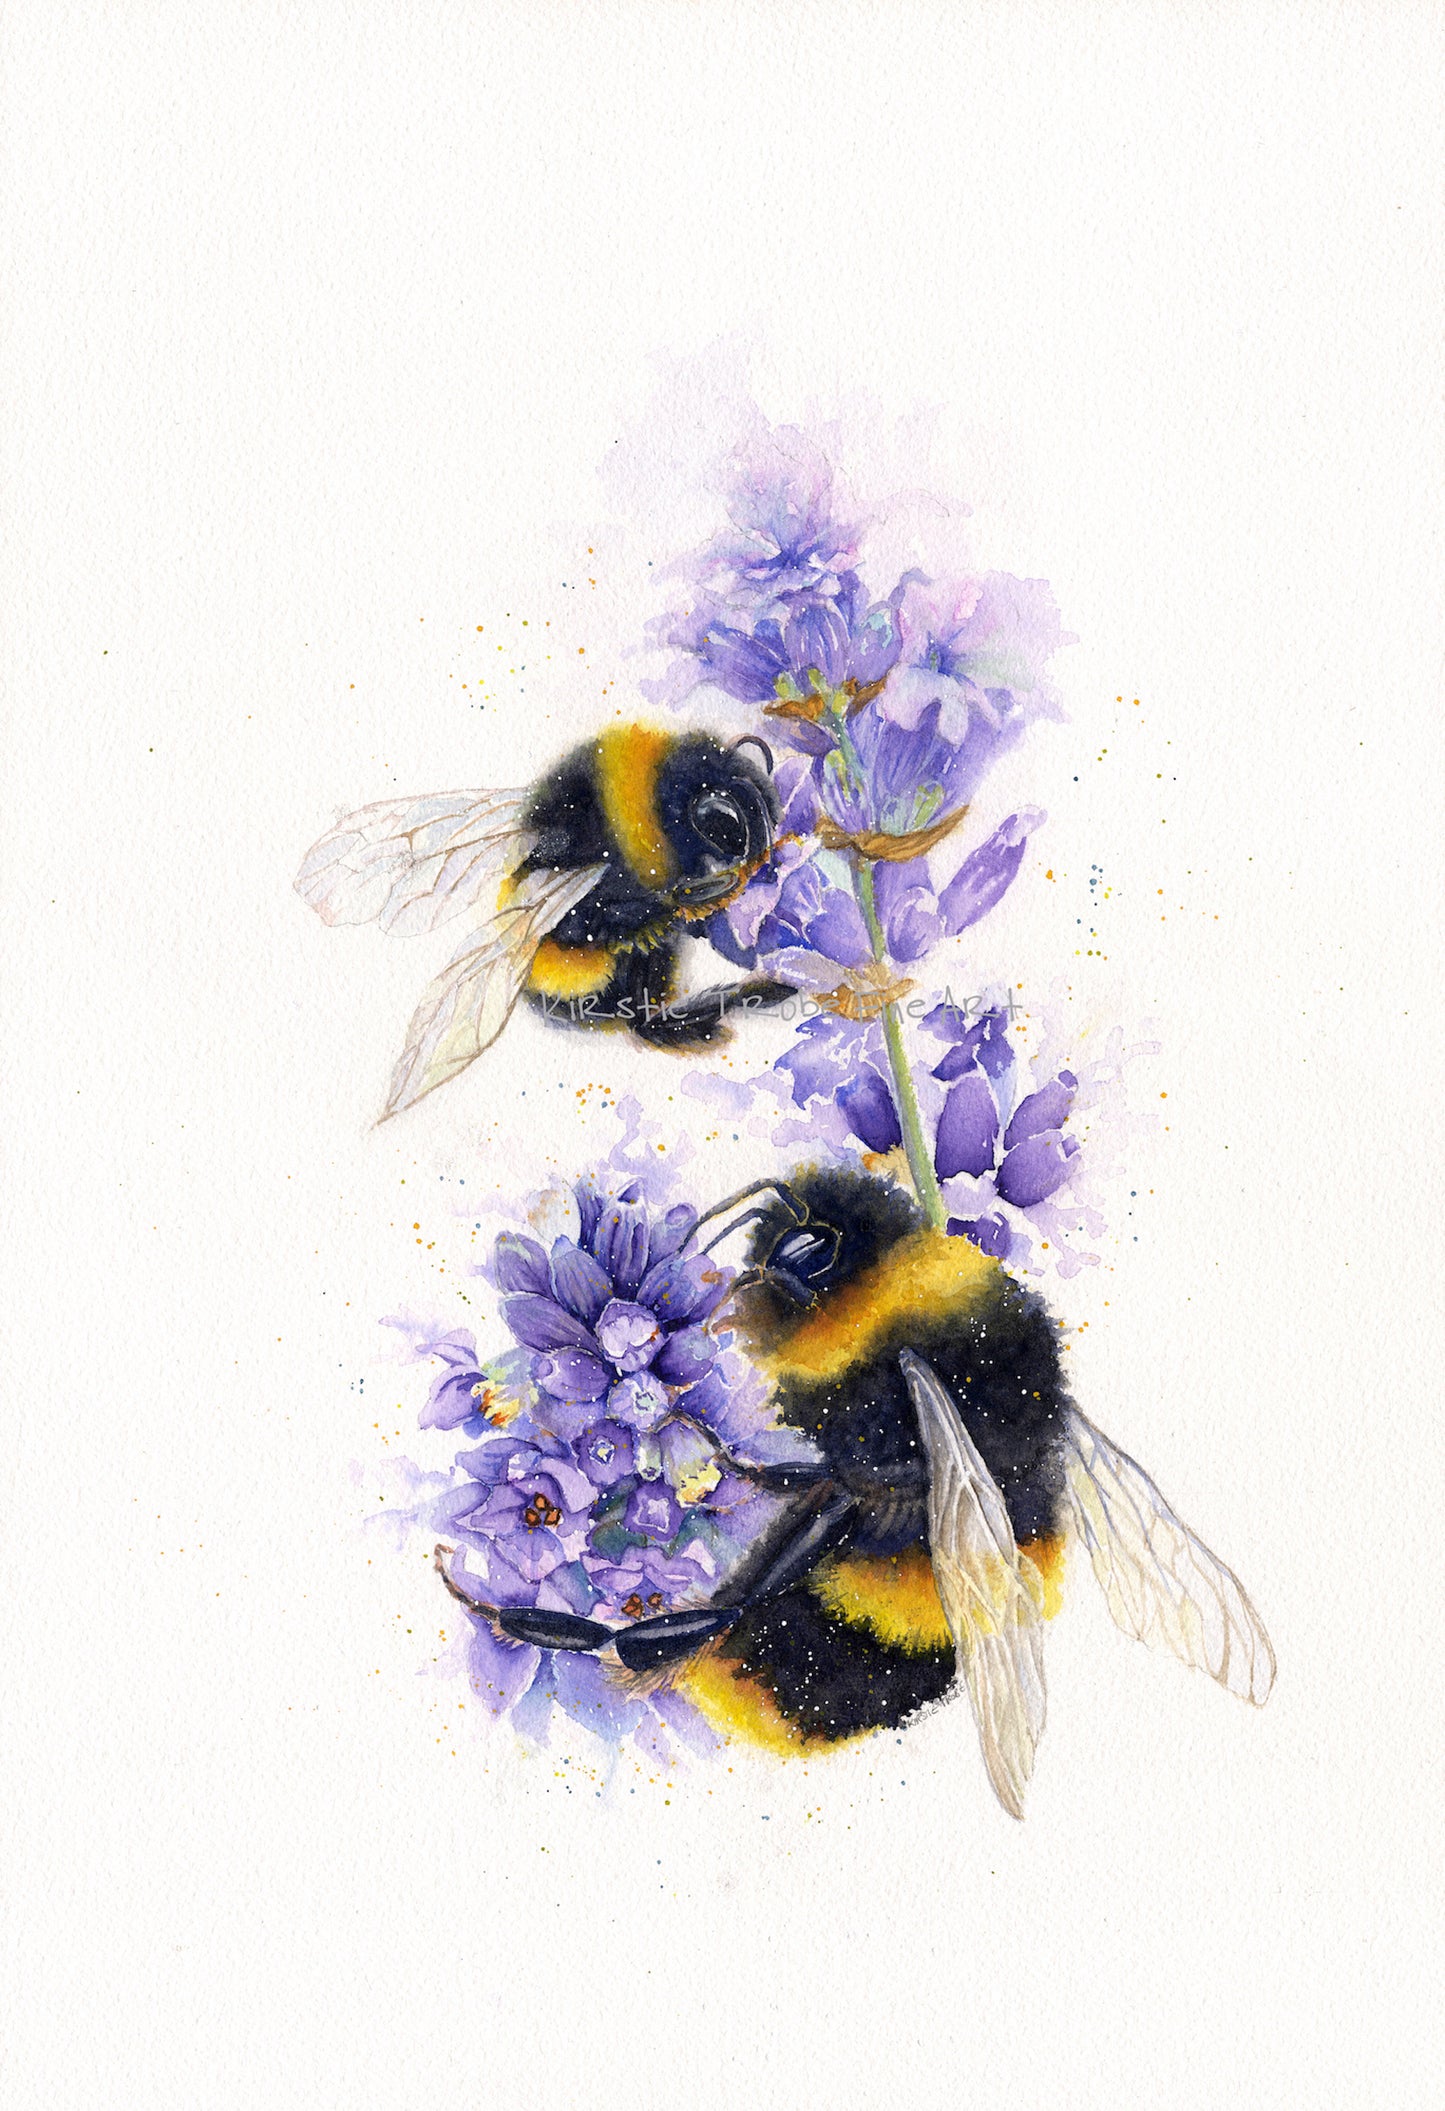 Two fluffy fuzzy bumble bees feed on two lavender flowers. They are depicted in a portrait fashion, the top bee is smaller and further away. The bees form a Ying and Yang shape.